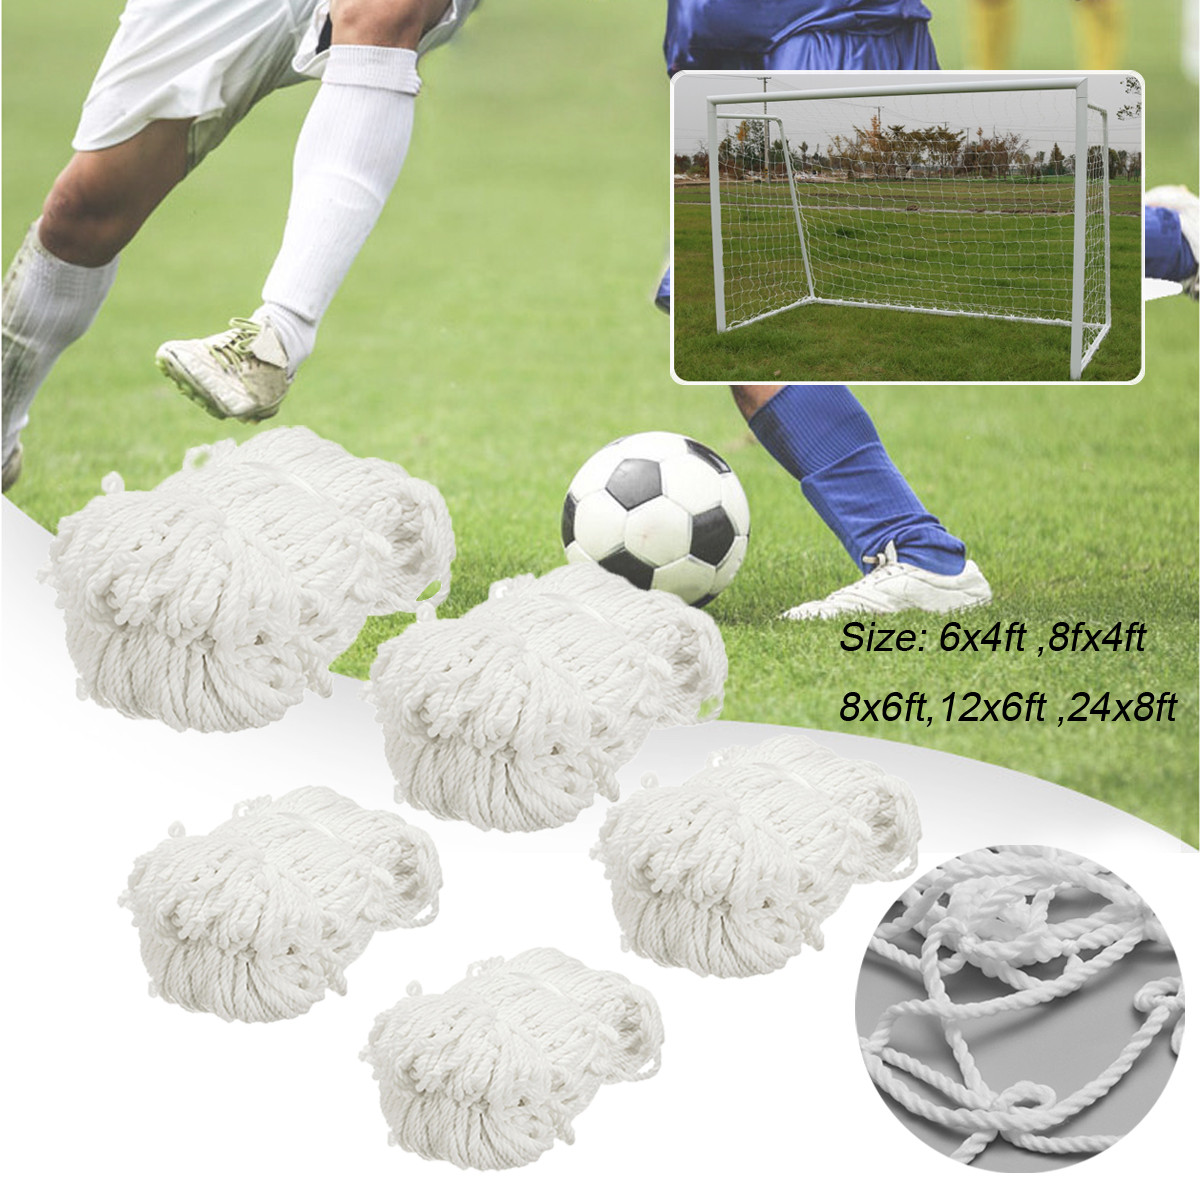 6x 4ft Football Soccer Goal Post Nets For Sports Training Match Replace White TW 